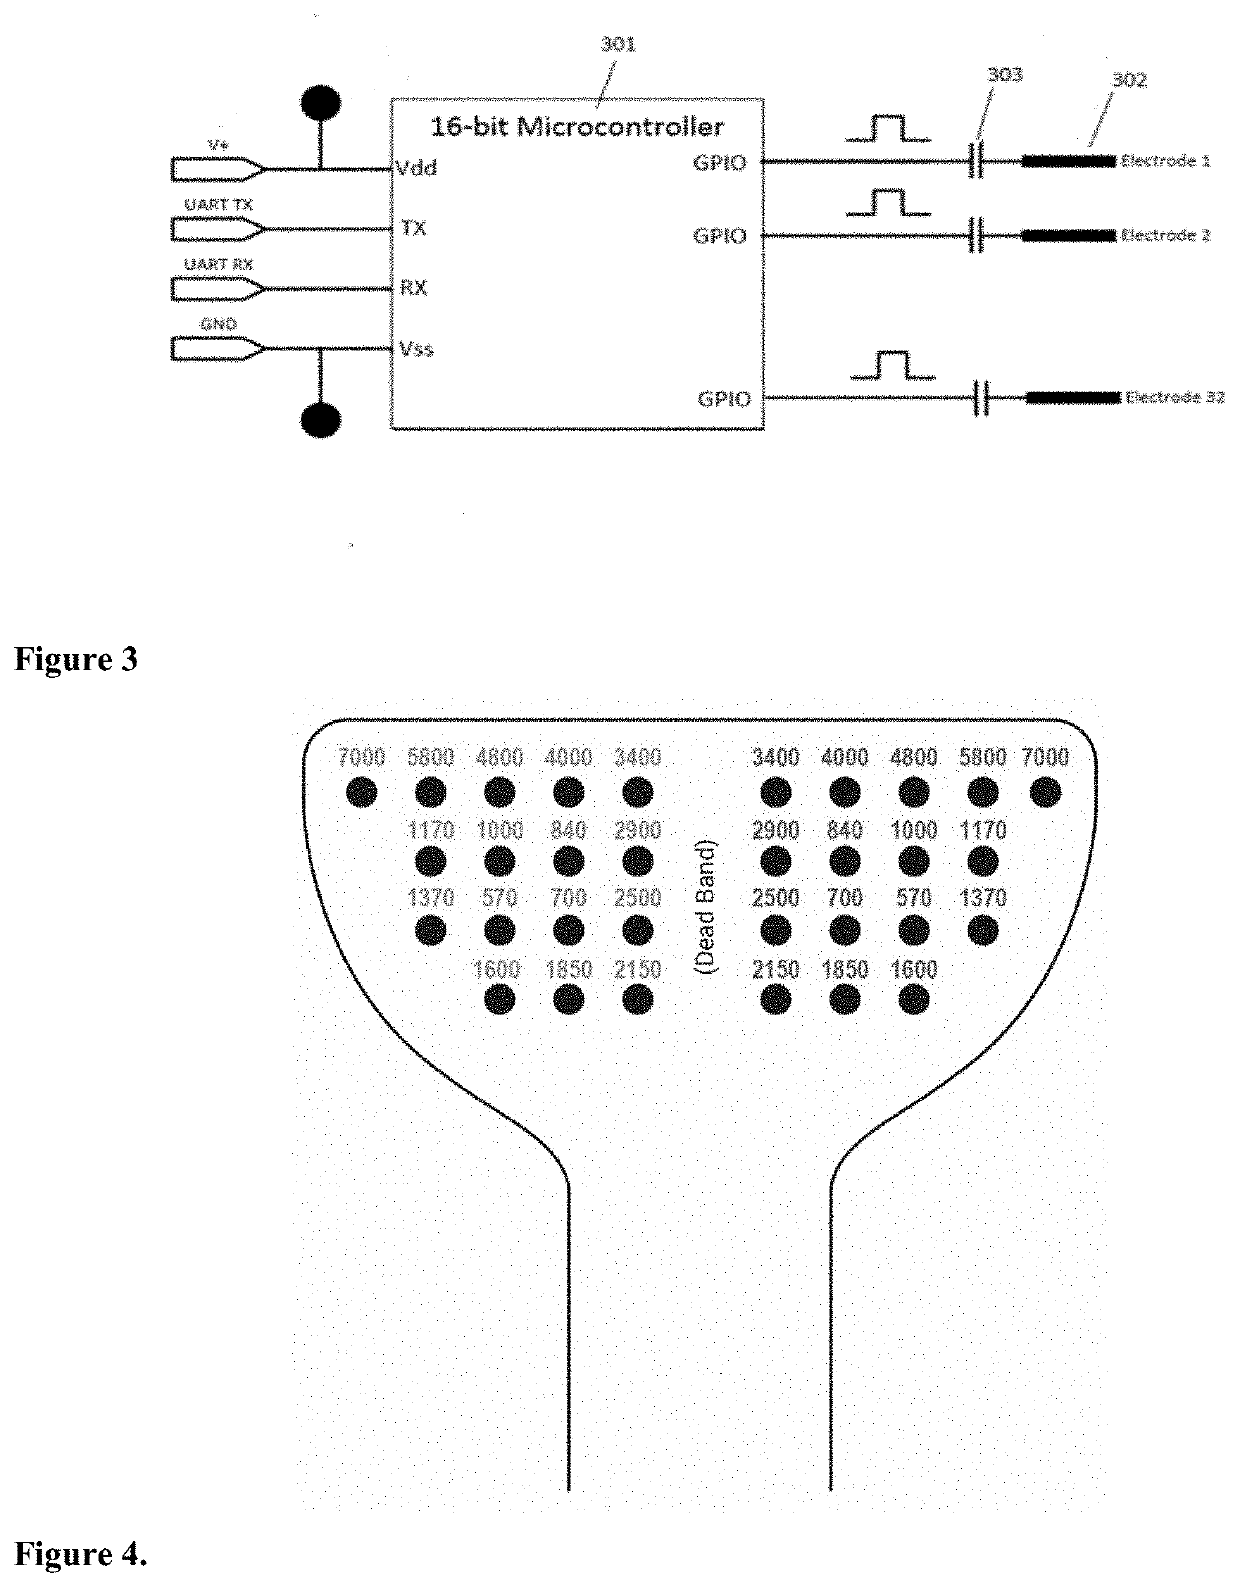 An apparatus and method for treating a neurological disorder of the auditory system